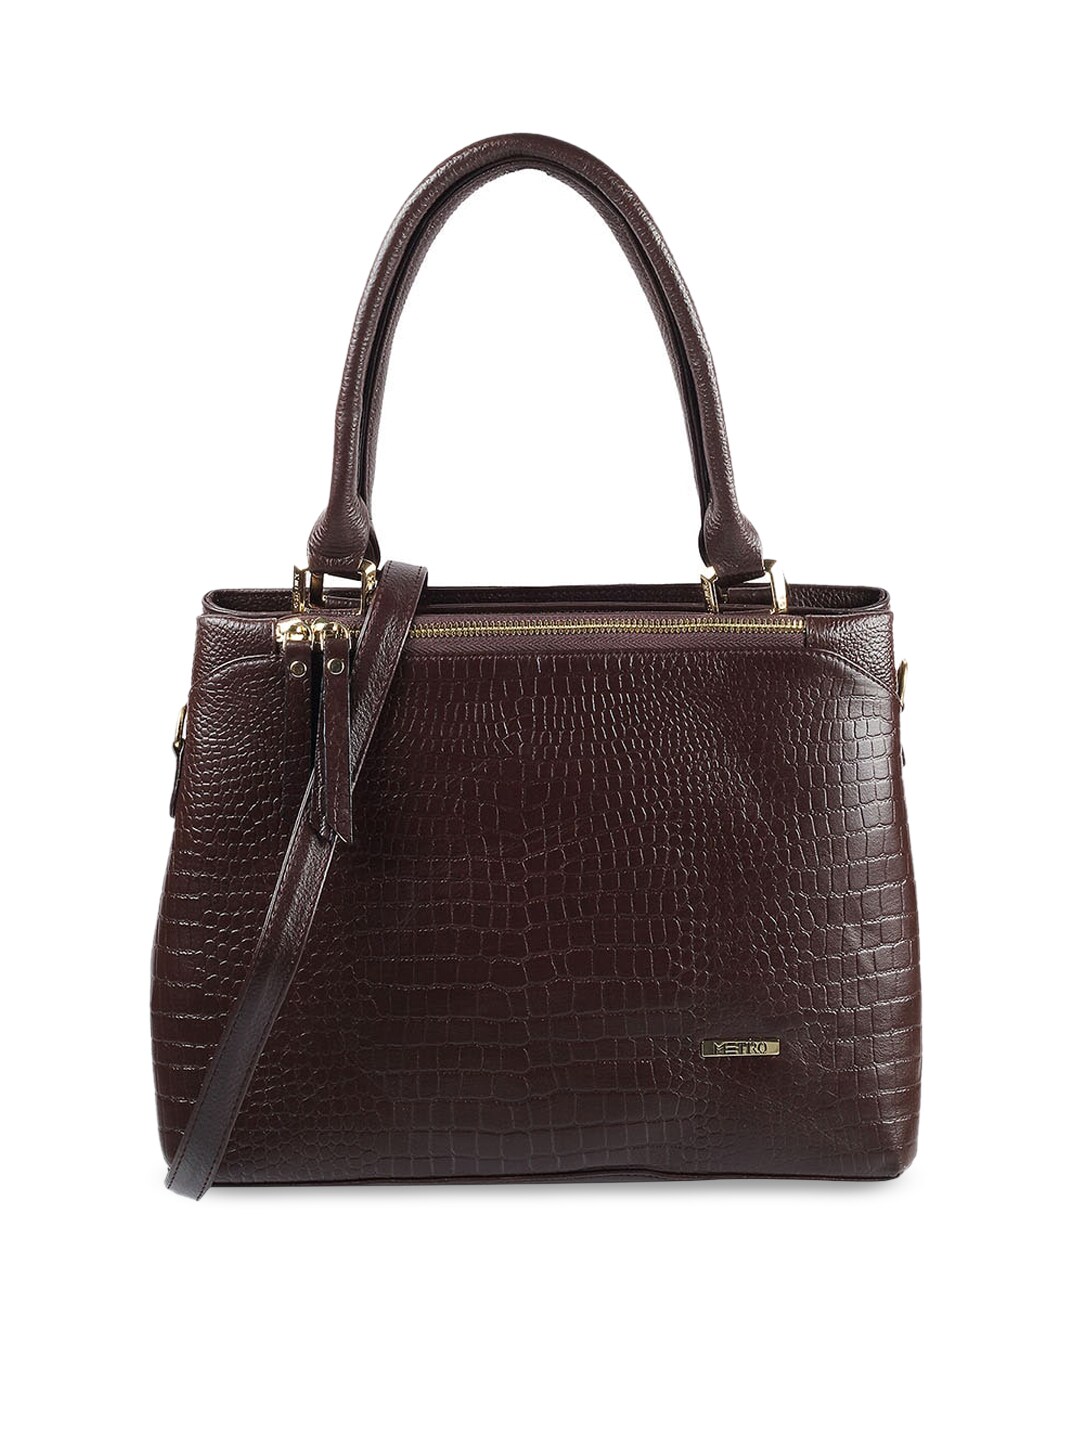 Metro Brown Textured Leather Structured Handheld Bag Price in India